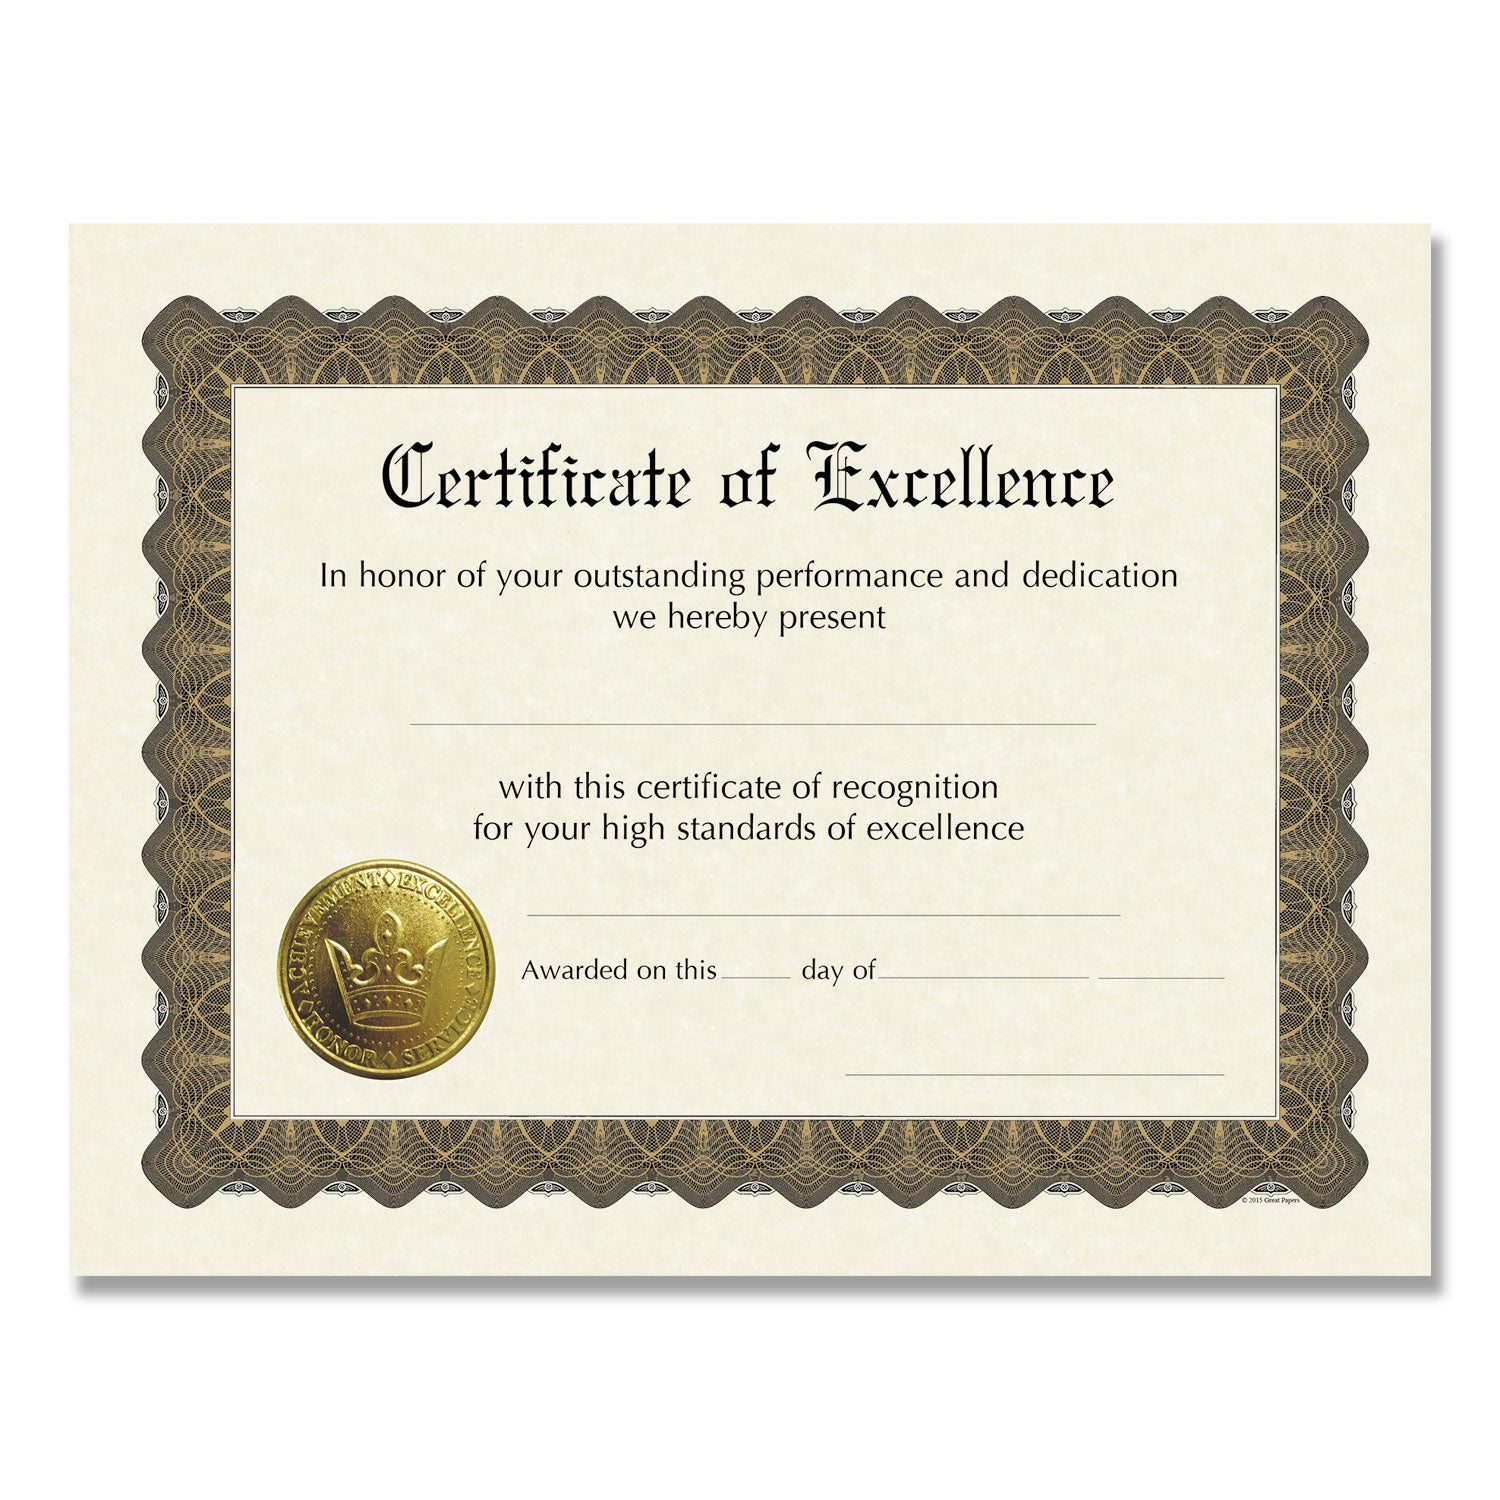 ready-to-use-certificates-excellence-11-x-85-ivory-brown-gold-colors-with-brown-border-6-pack_cos930600 - 1